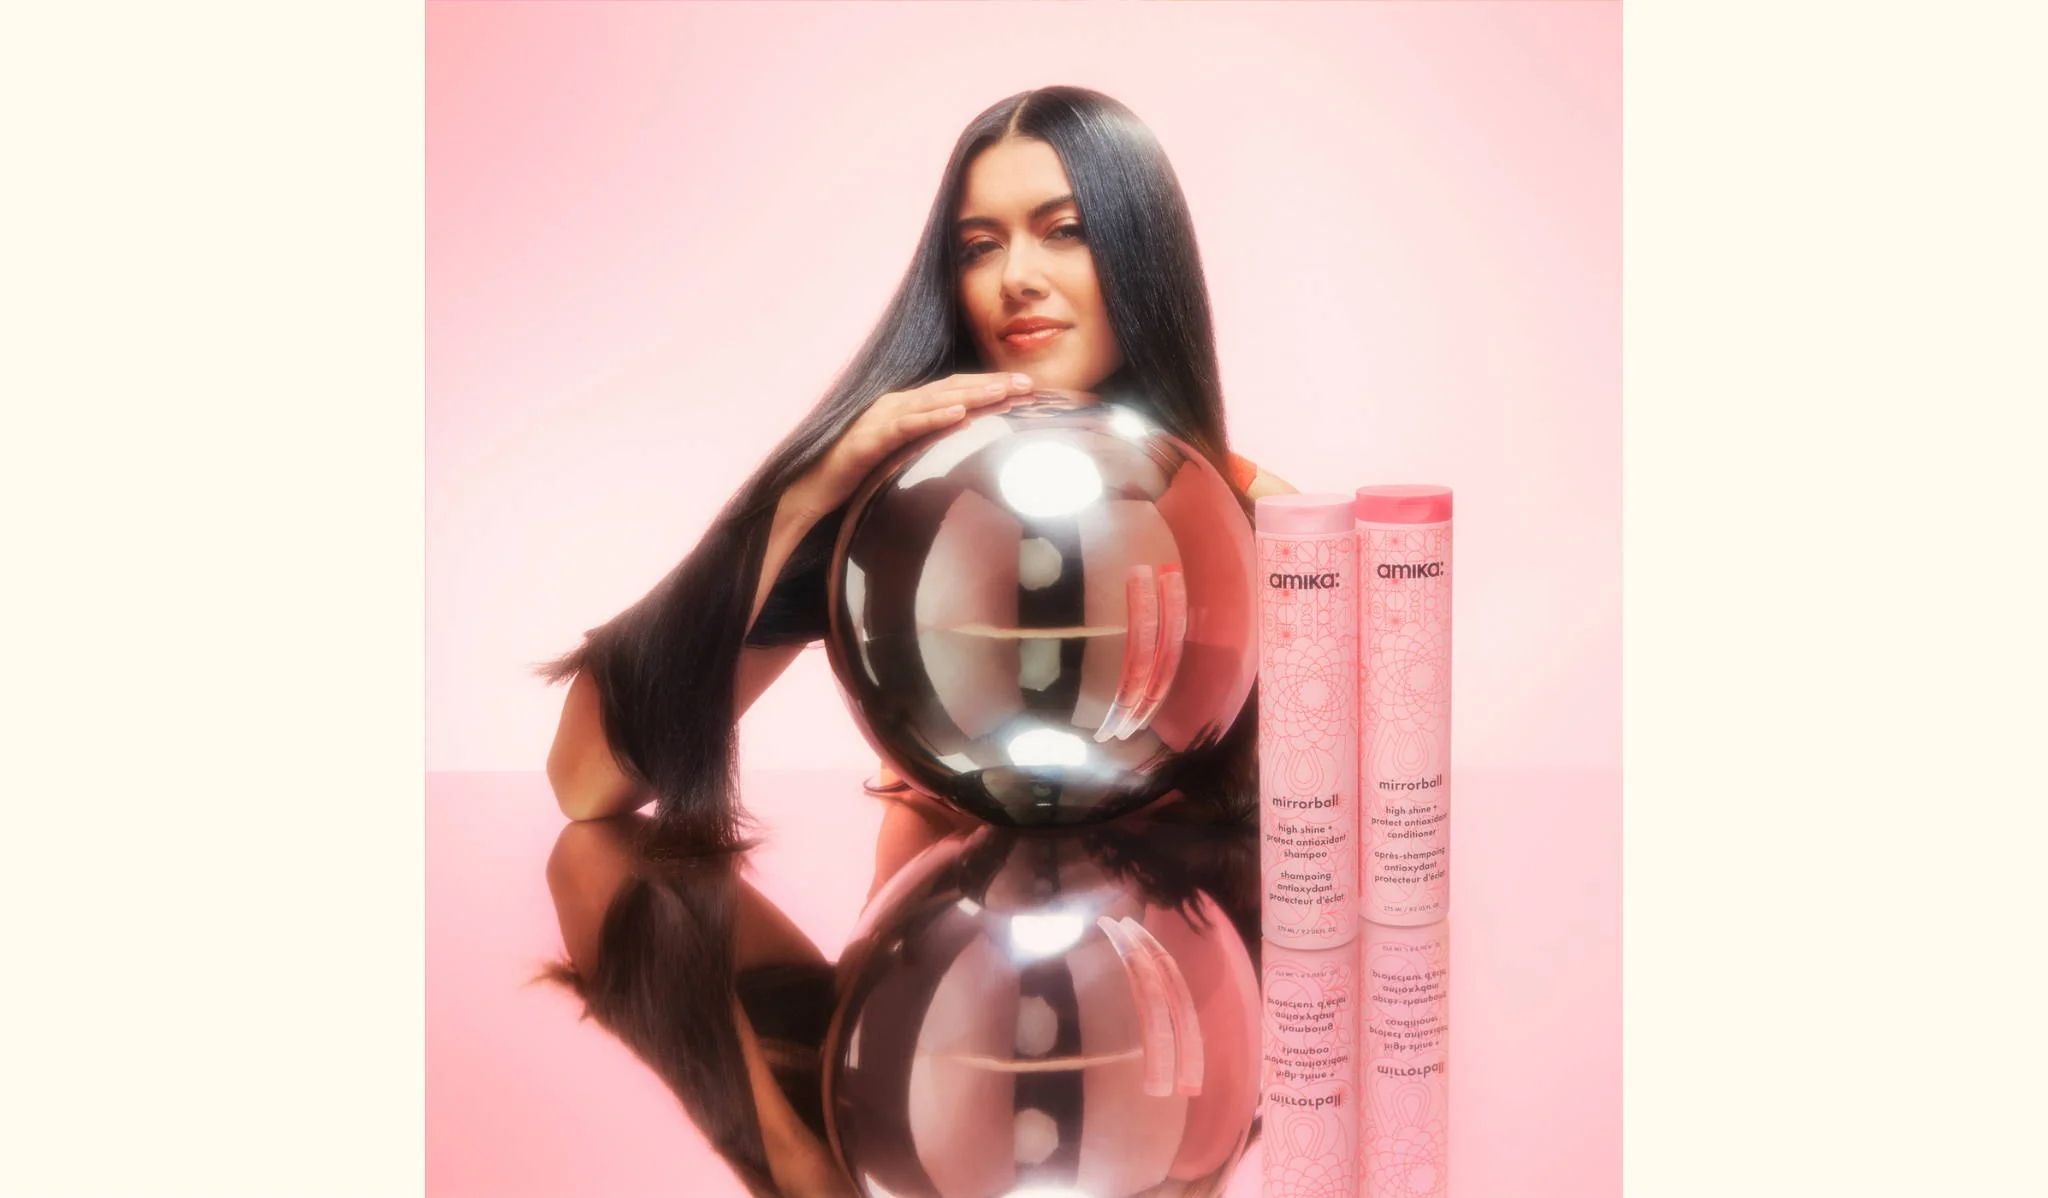 model posing with mirrorball high shine + protect antioxidant shampoo and conditioner